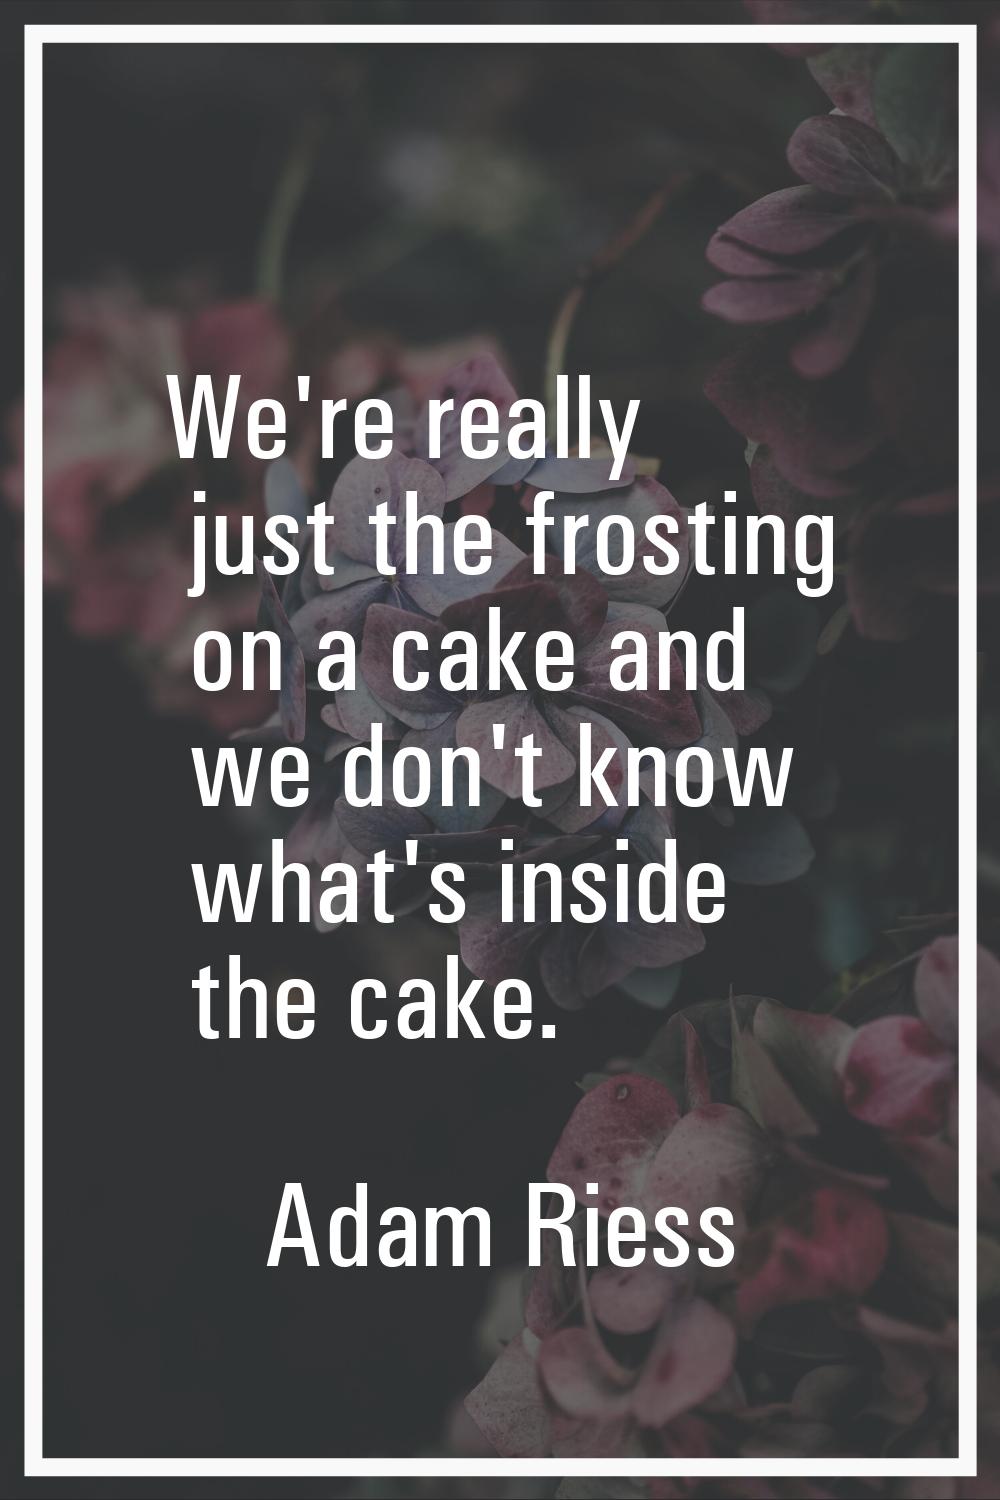 We're really just the frosting on a cake and we don't know what's inside the cake.